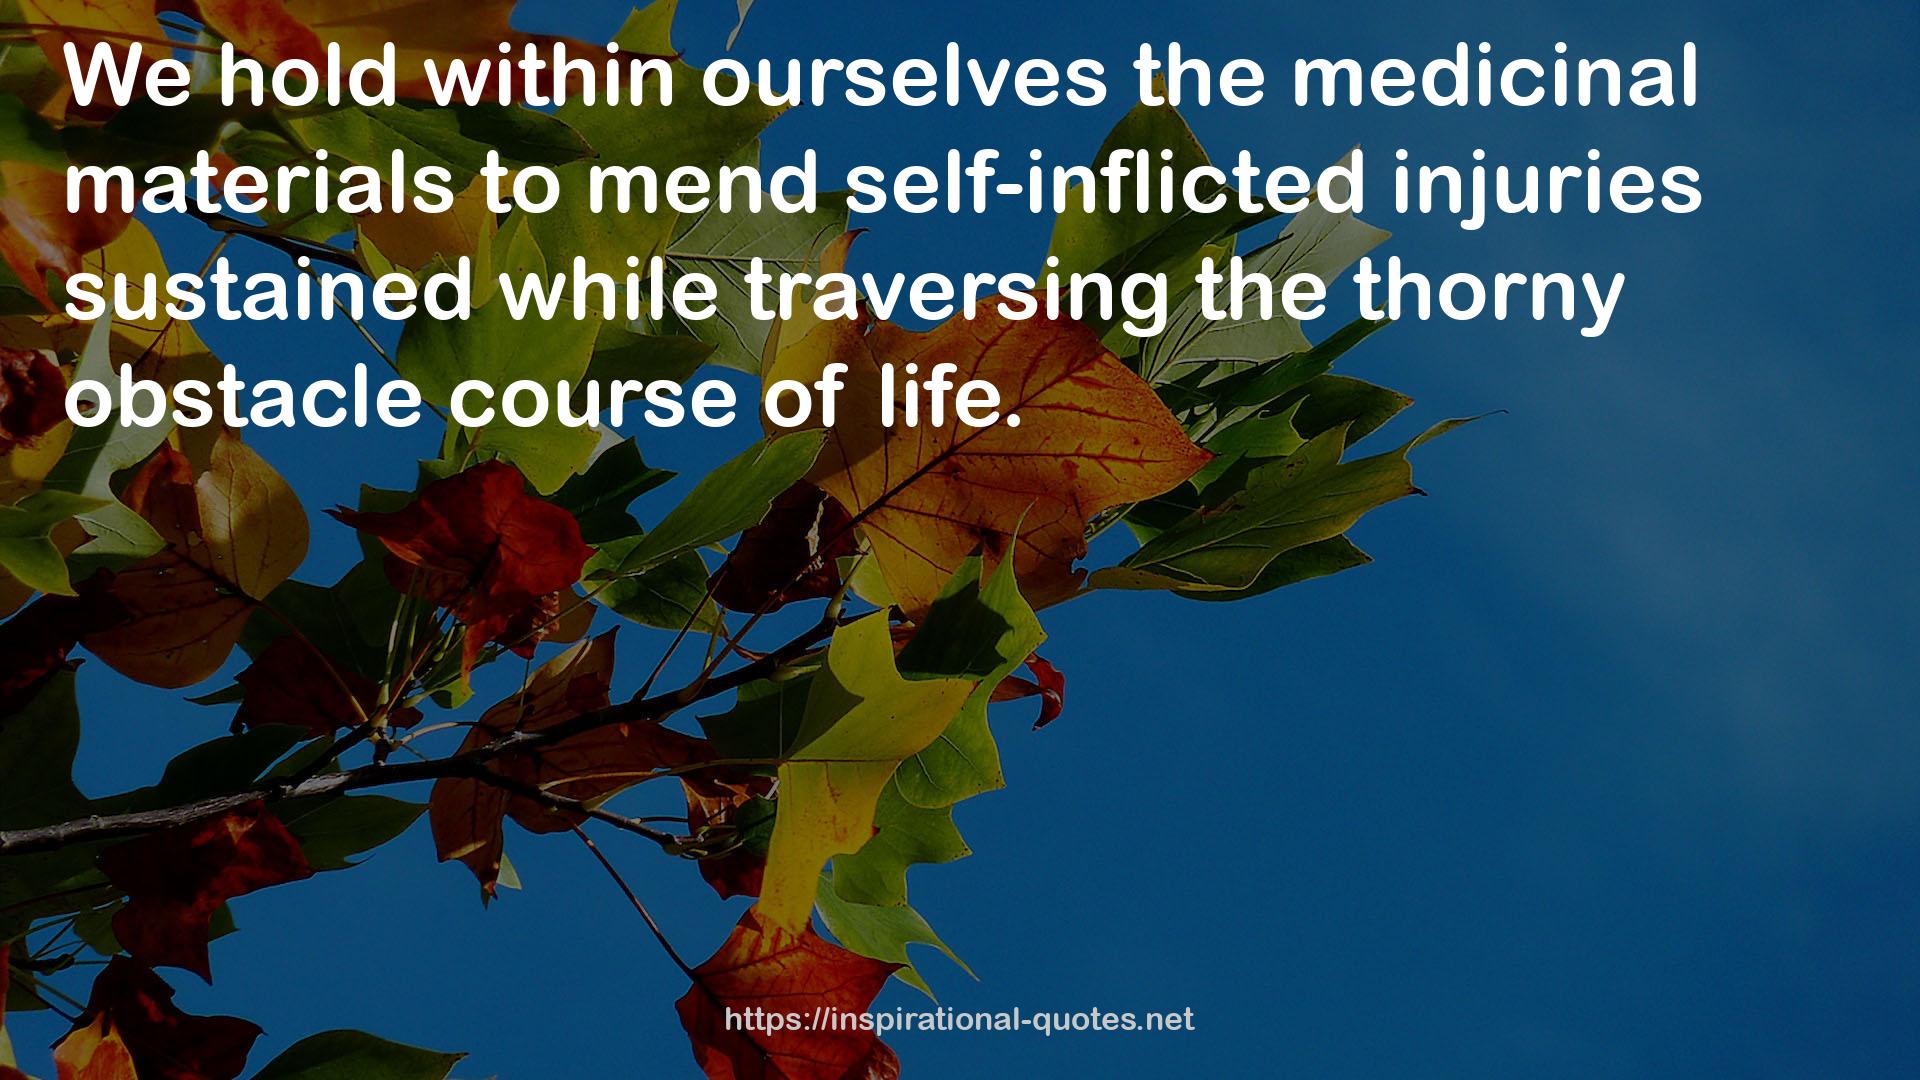 self-inflicted injuries  QUOTES